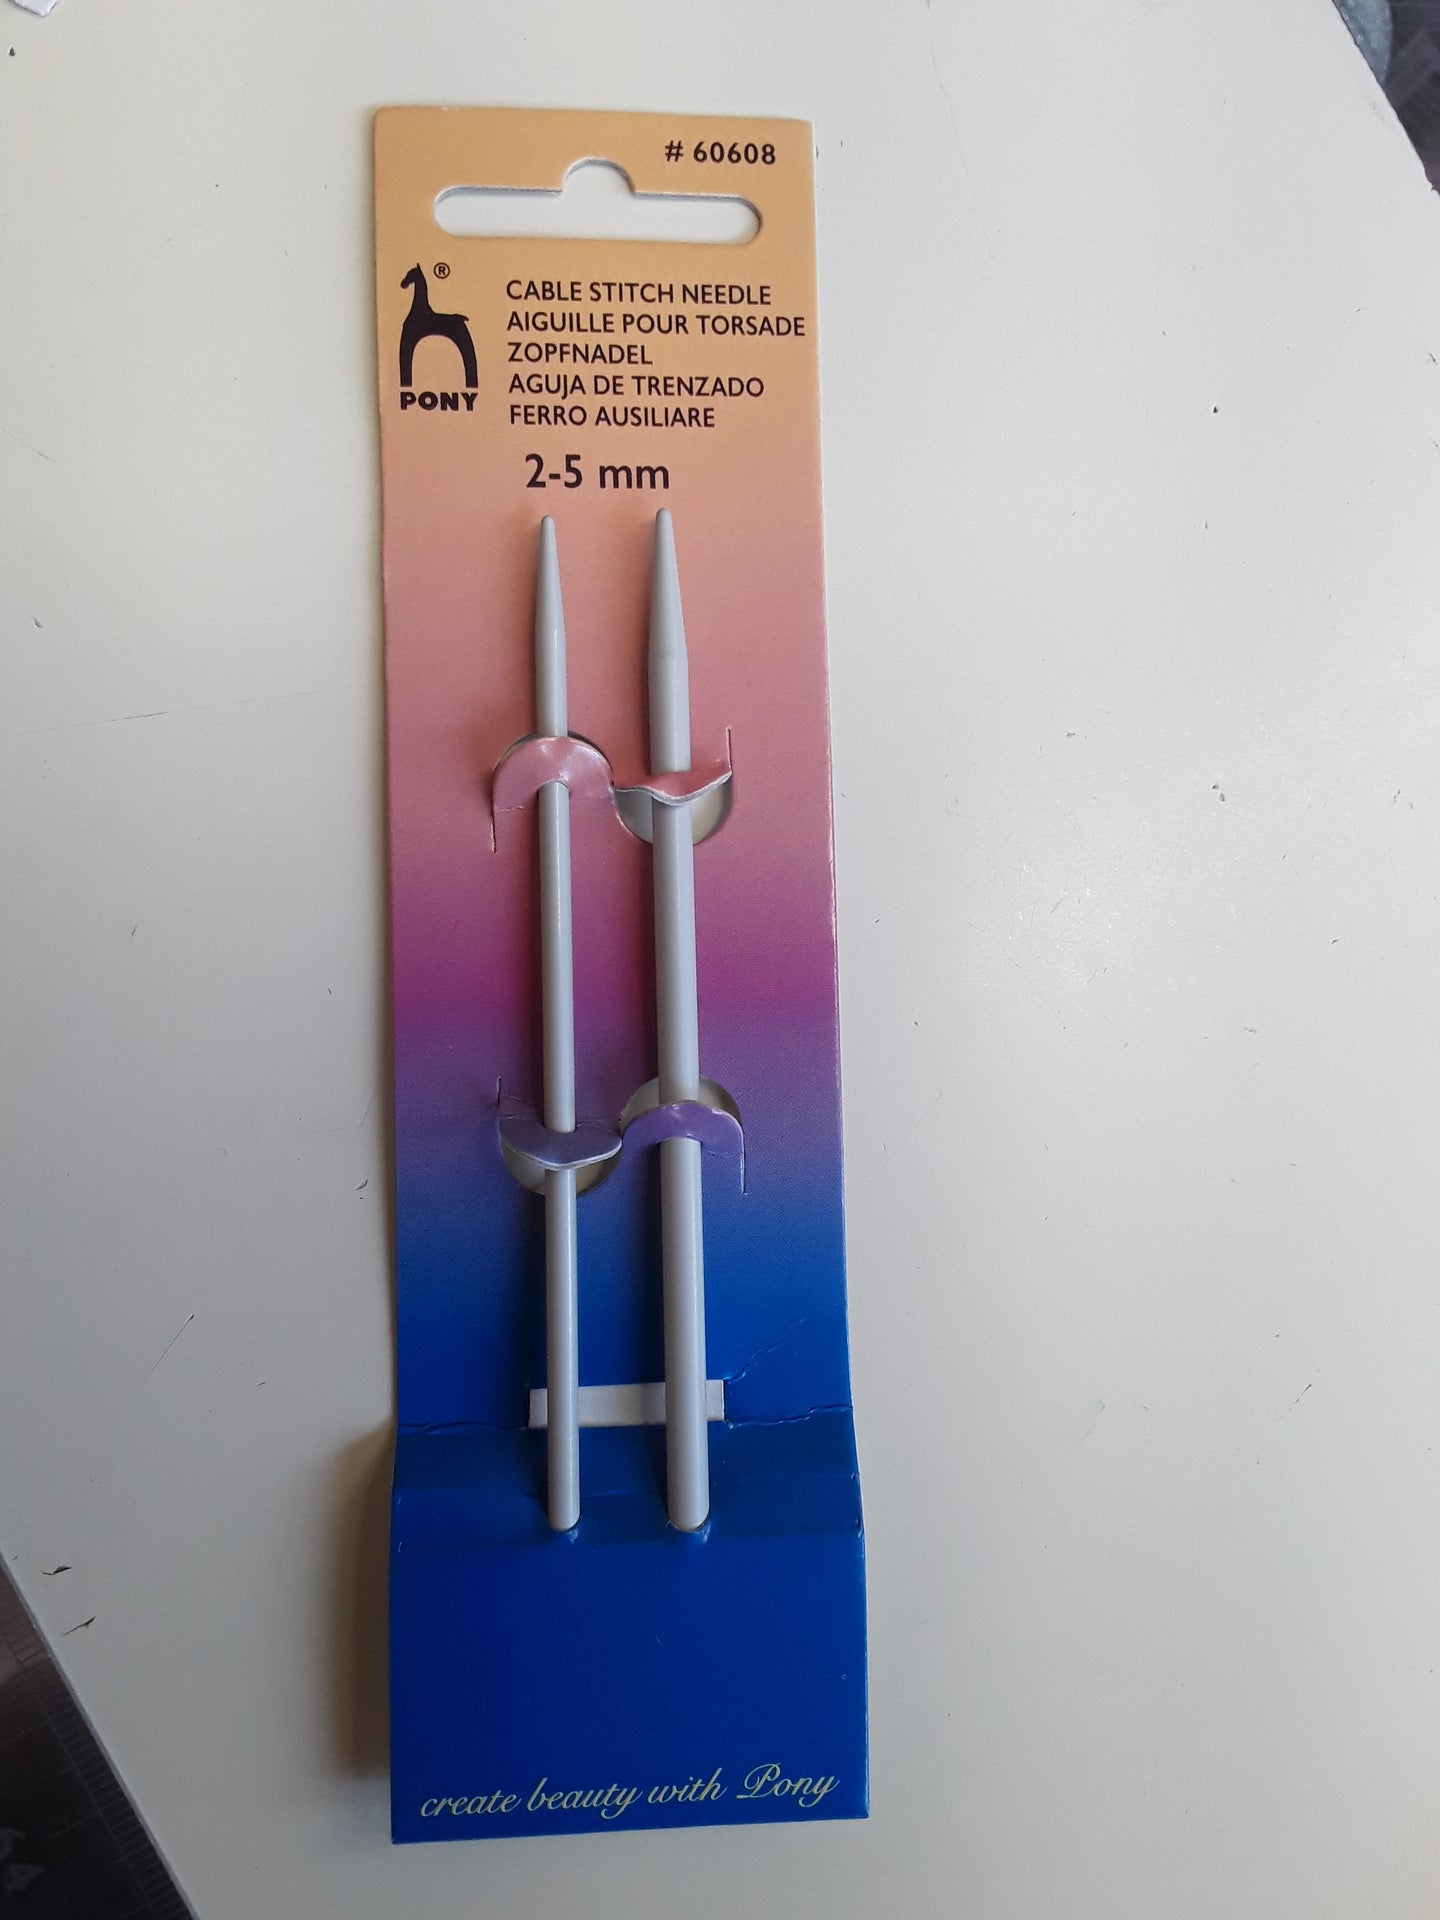 Cable needles for sizes 2-5mm